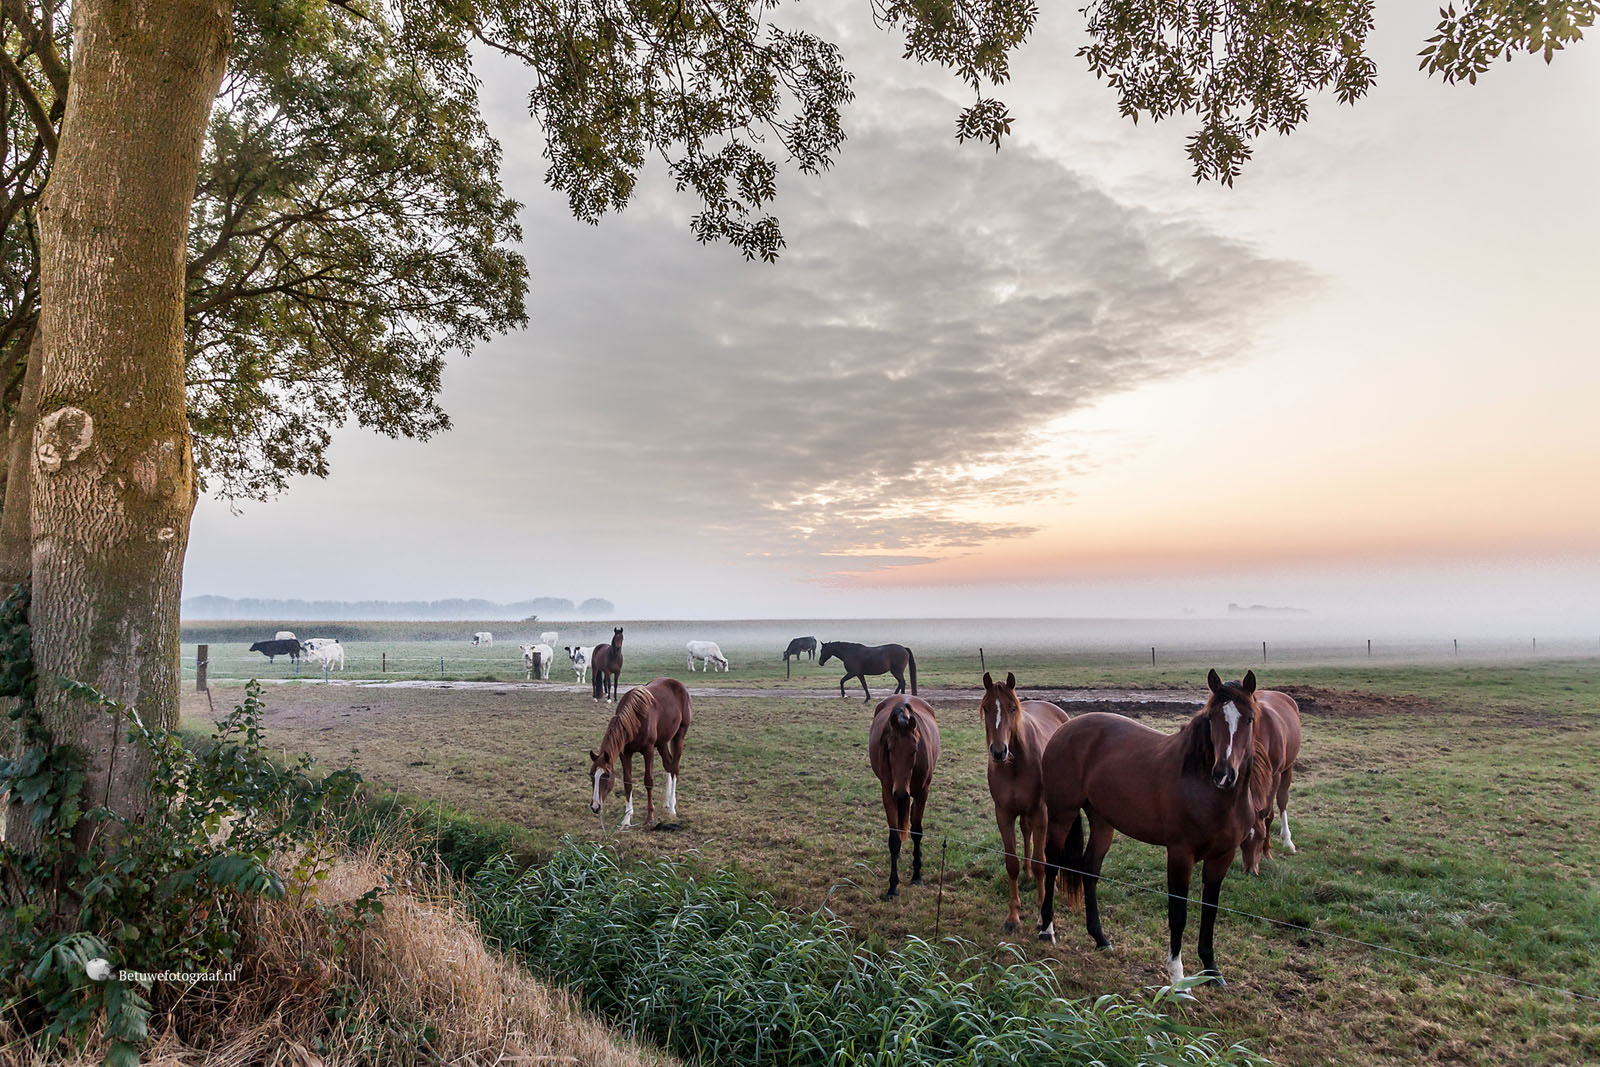 Canon EOS 5D Mark II + Sigma 24-105mm f/4 DG OS HSM | A sample photo. Horses in the morning mist photography